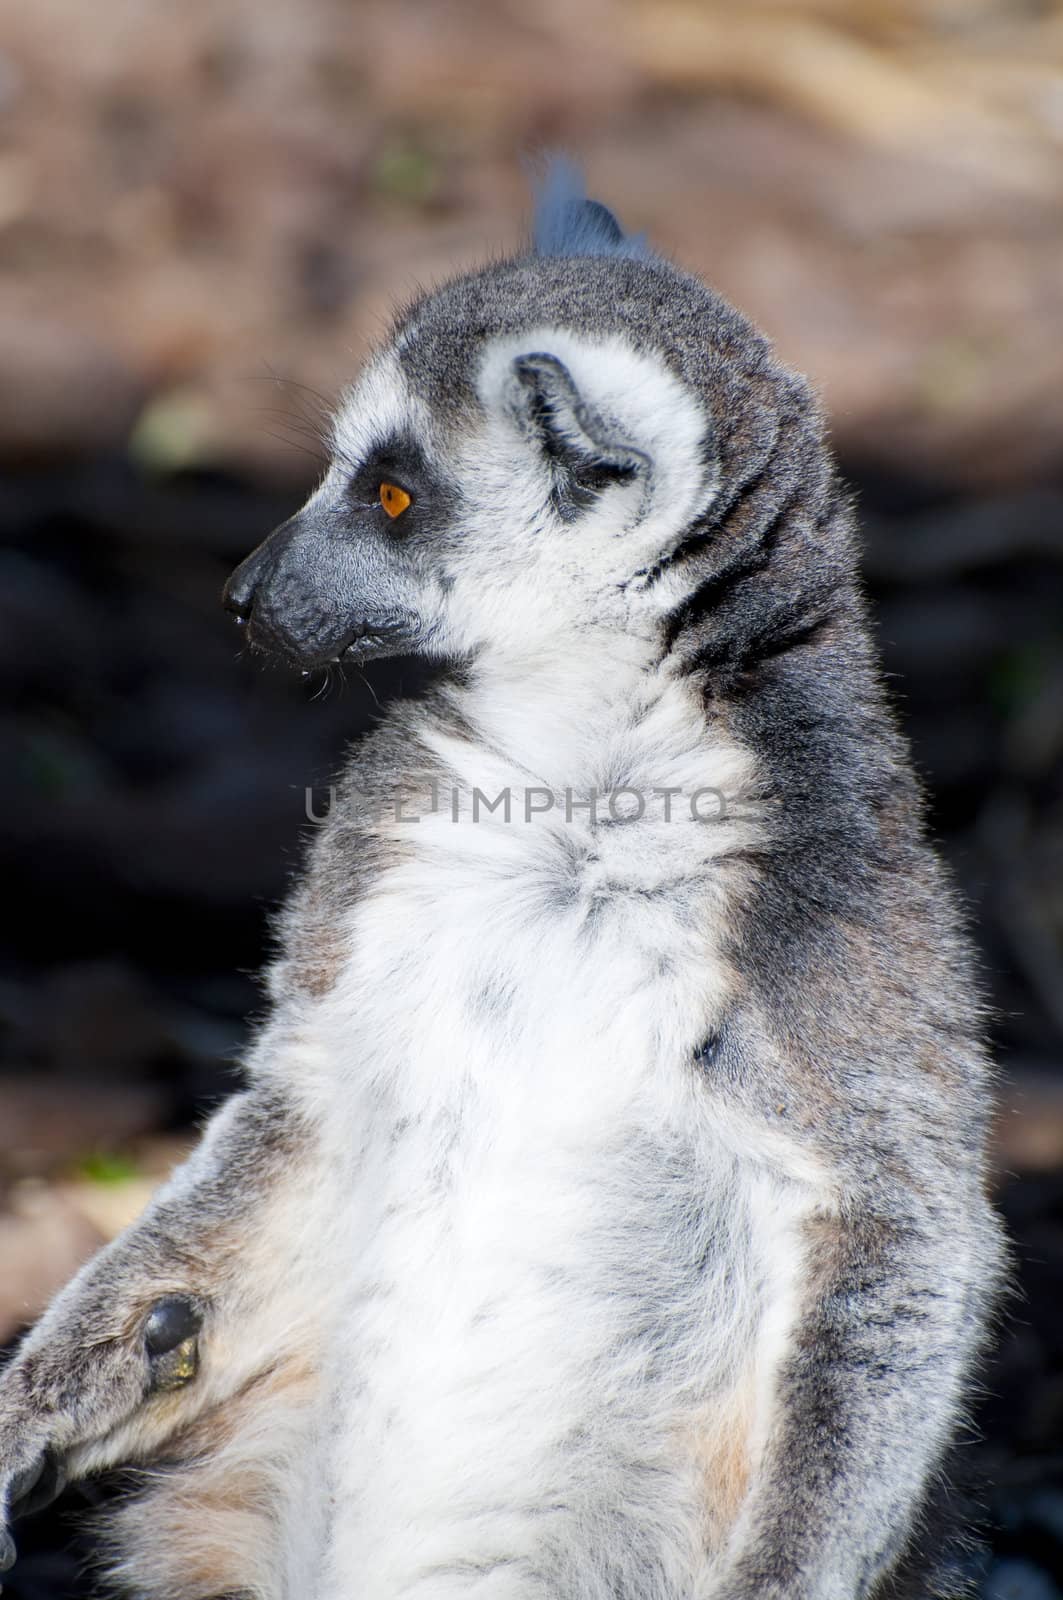 Picture of a nice lemur with beautiful eyes and skin.